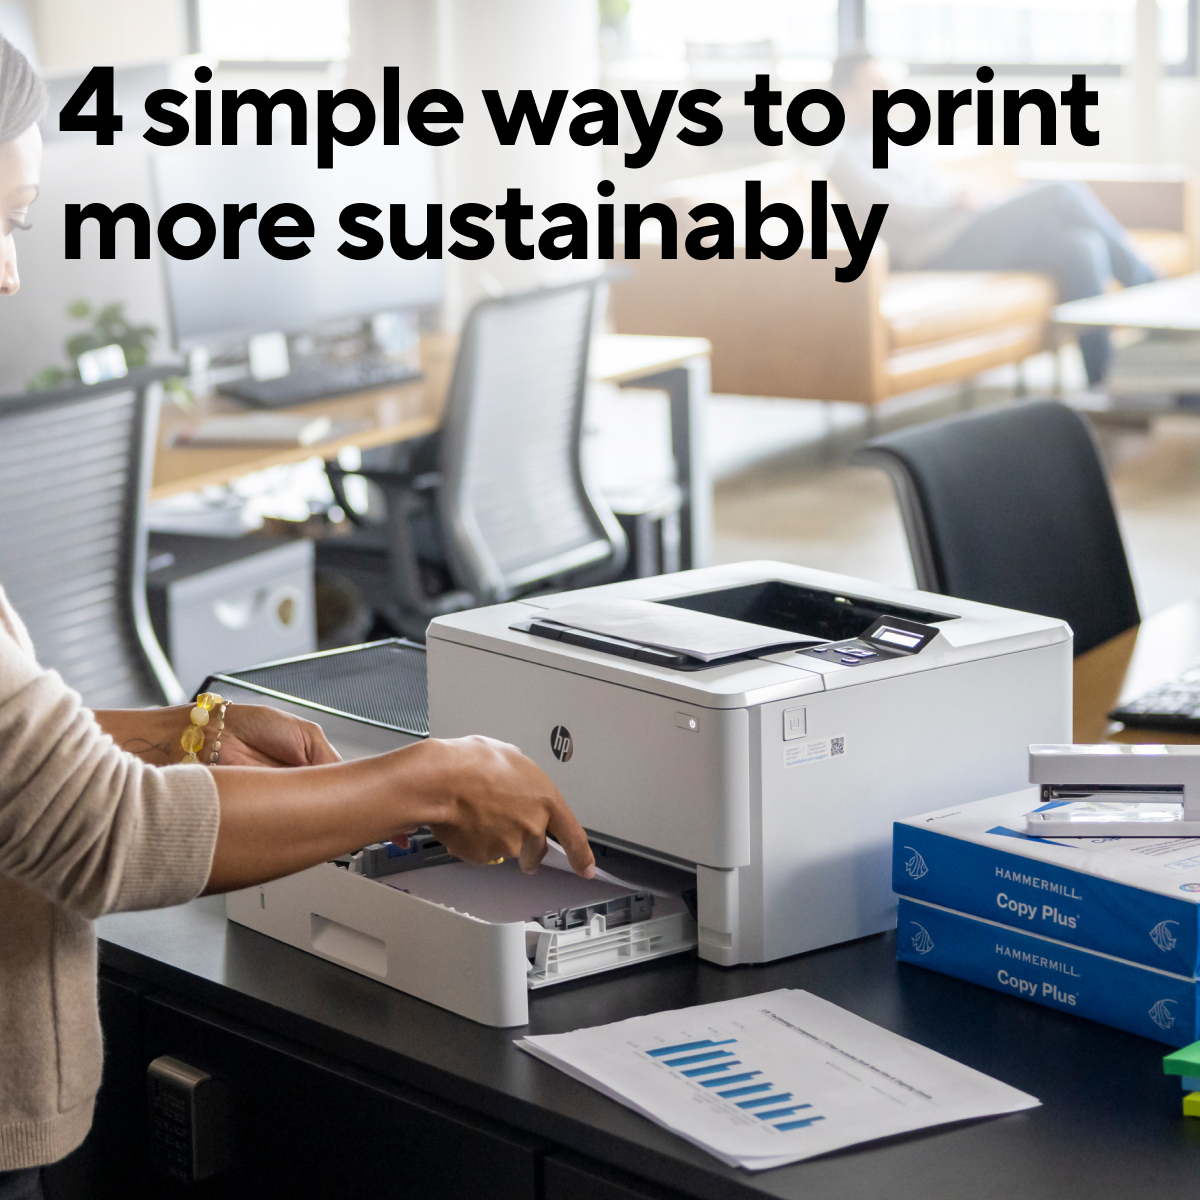 This #TipTuesday, let's print sustainably! Recycled paper, high-yield ink & toner cartridges, and EPEAT-certified printers are the way to go. Let's make eco-conscious printing a habit. 🖨️💚 bit.ly/43ZY9RA #Sustainability #EcoFriendlyPrinting